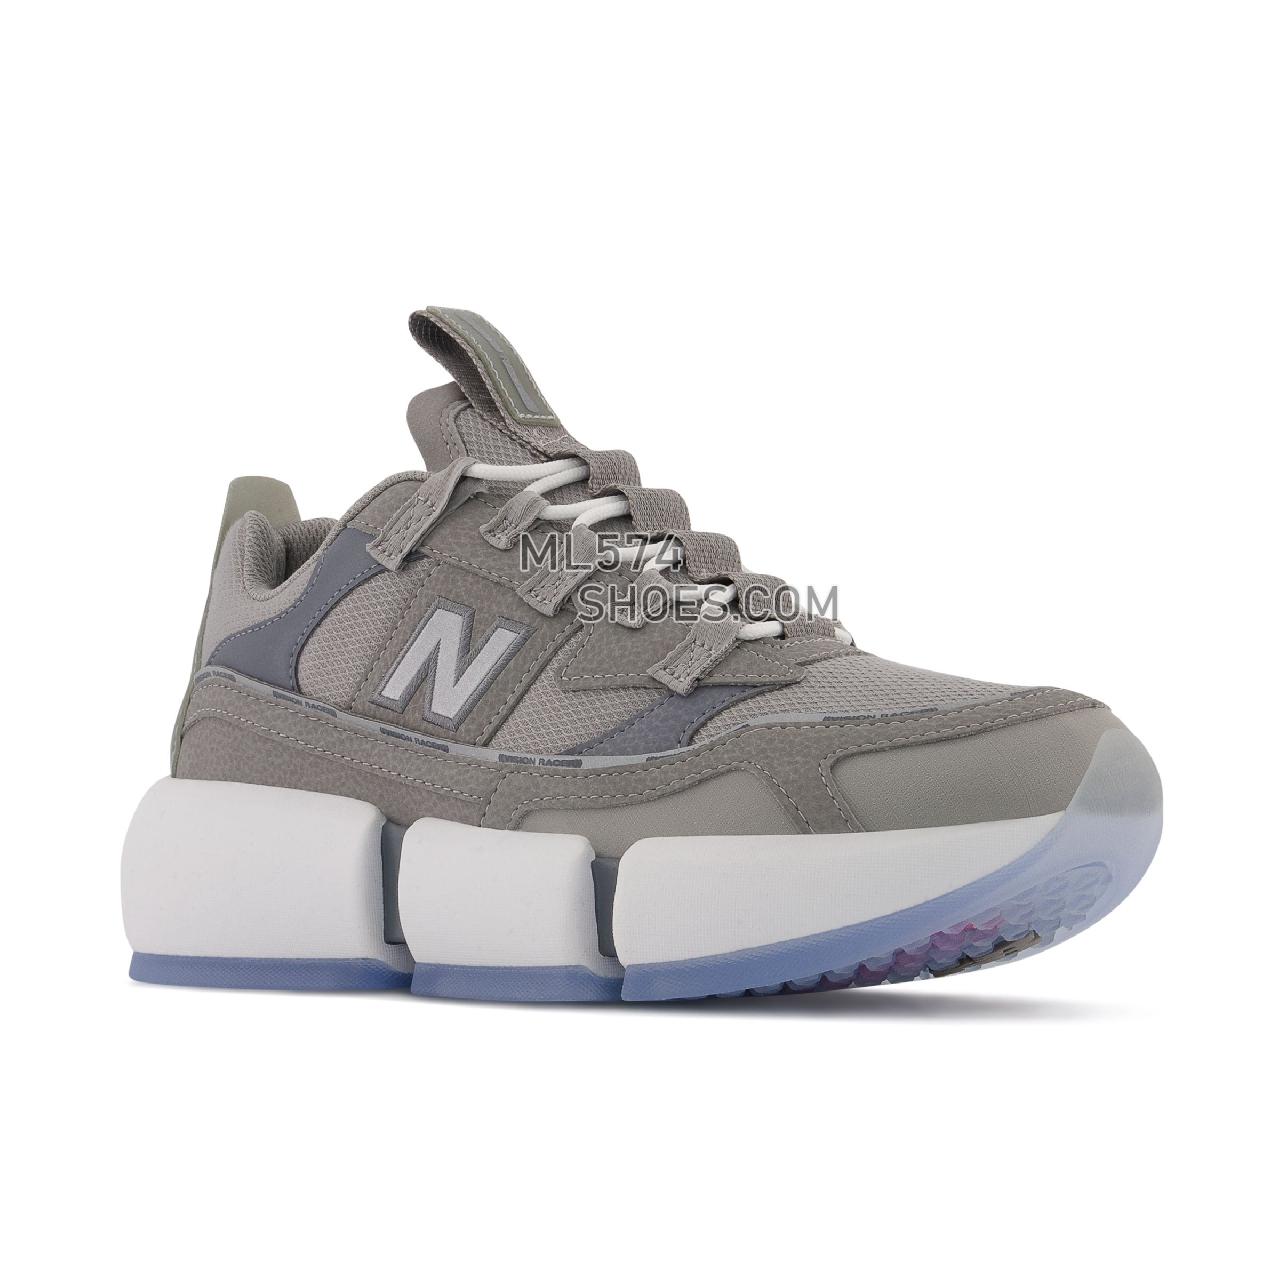 New Balance Vision Racer - Unisex Men's Women's Sport Style Sneakers - Team Away Grey with White - MSVRCJSD